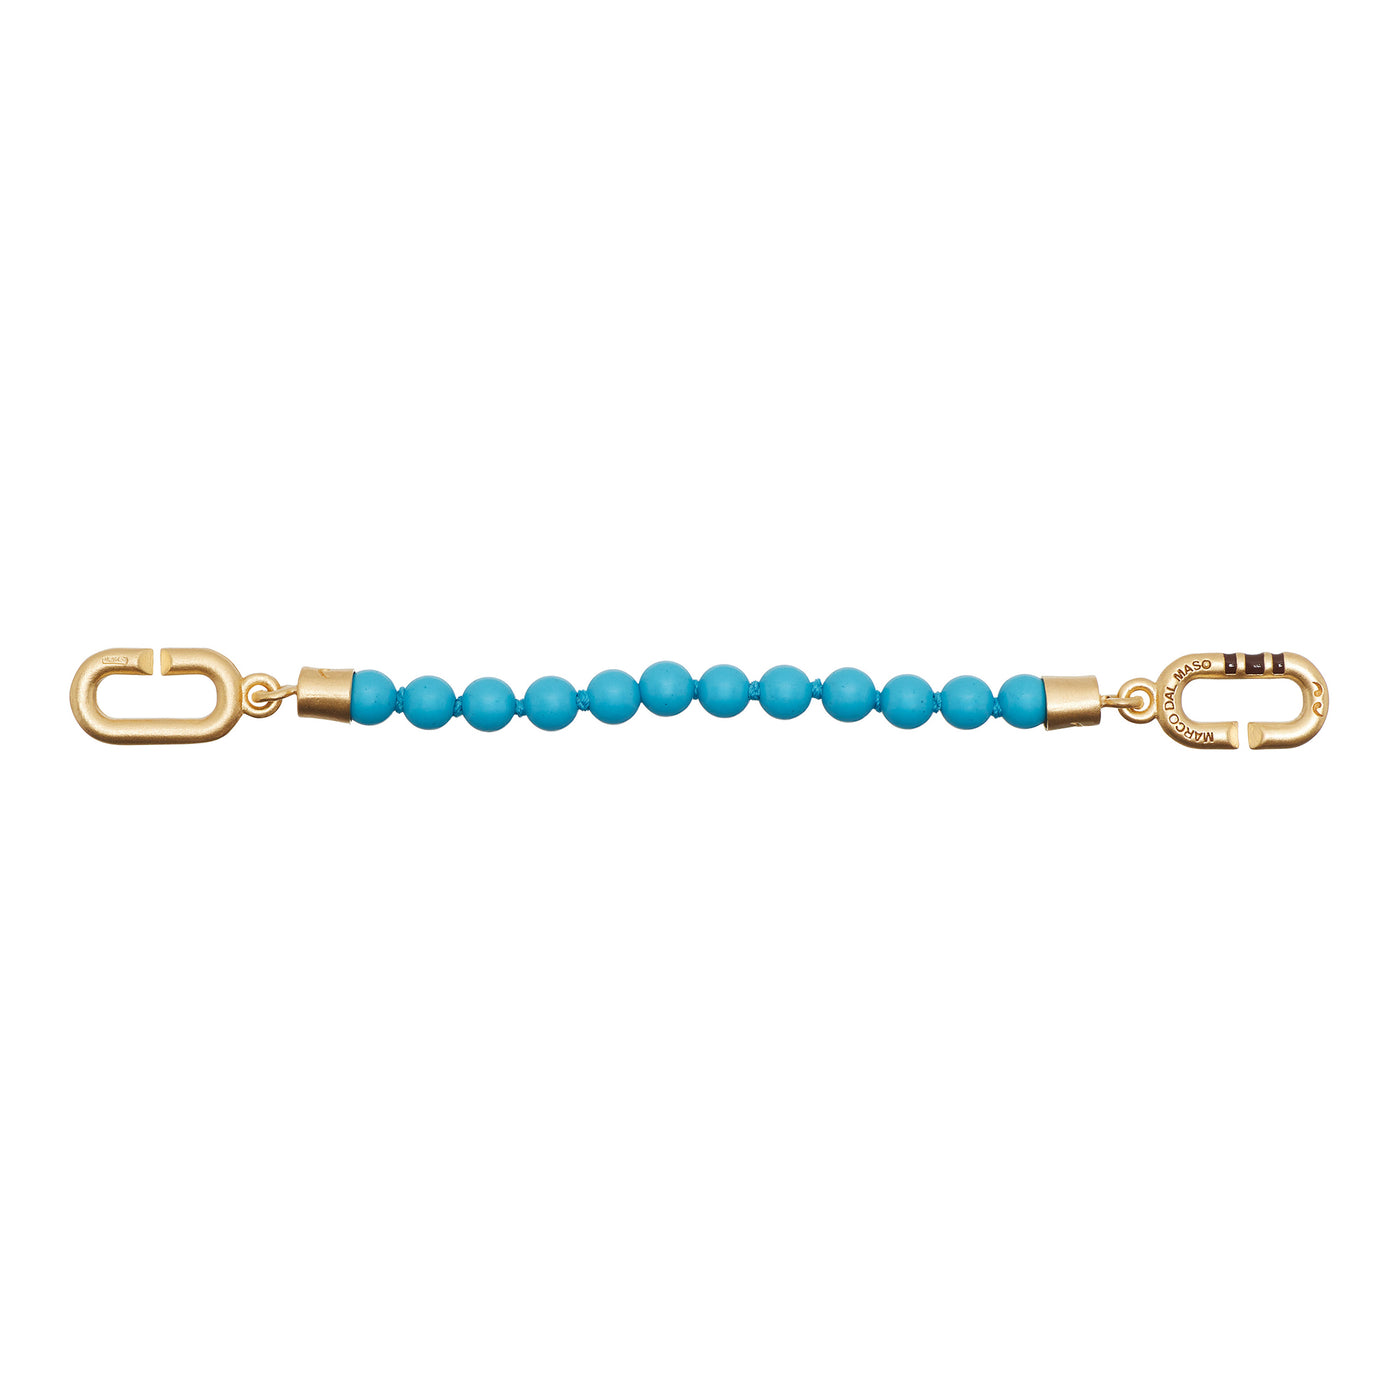 THE LINK Turquoise Extension Beads with Vermeil